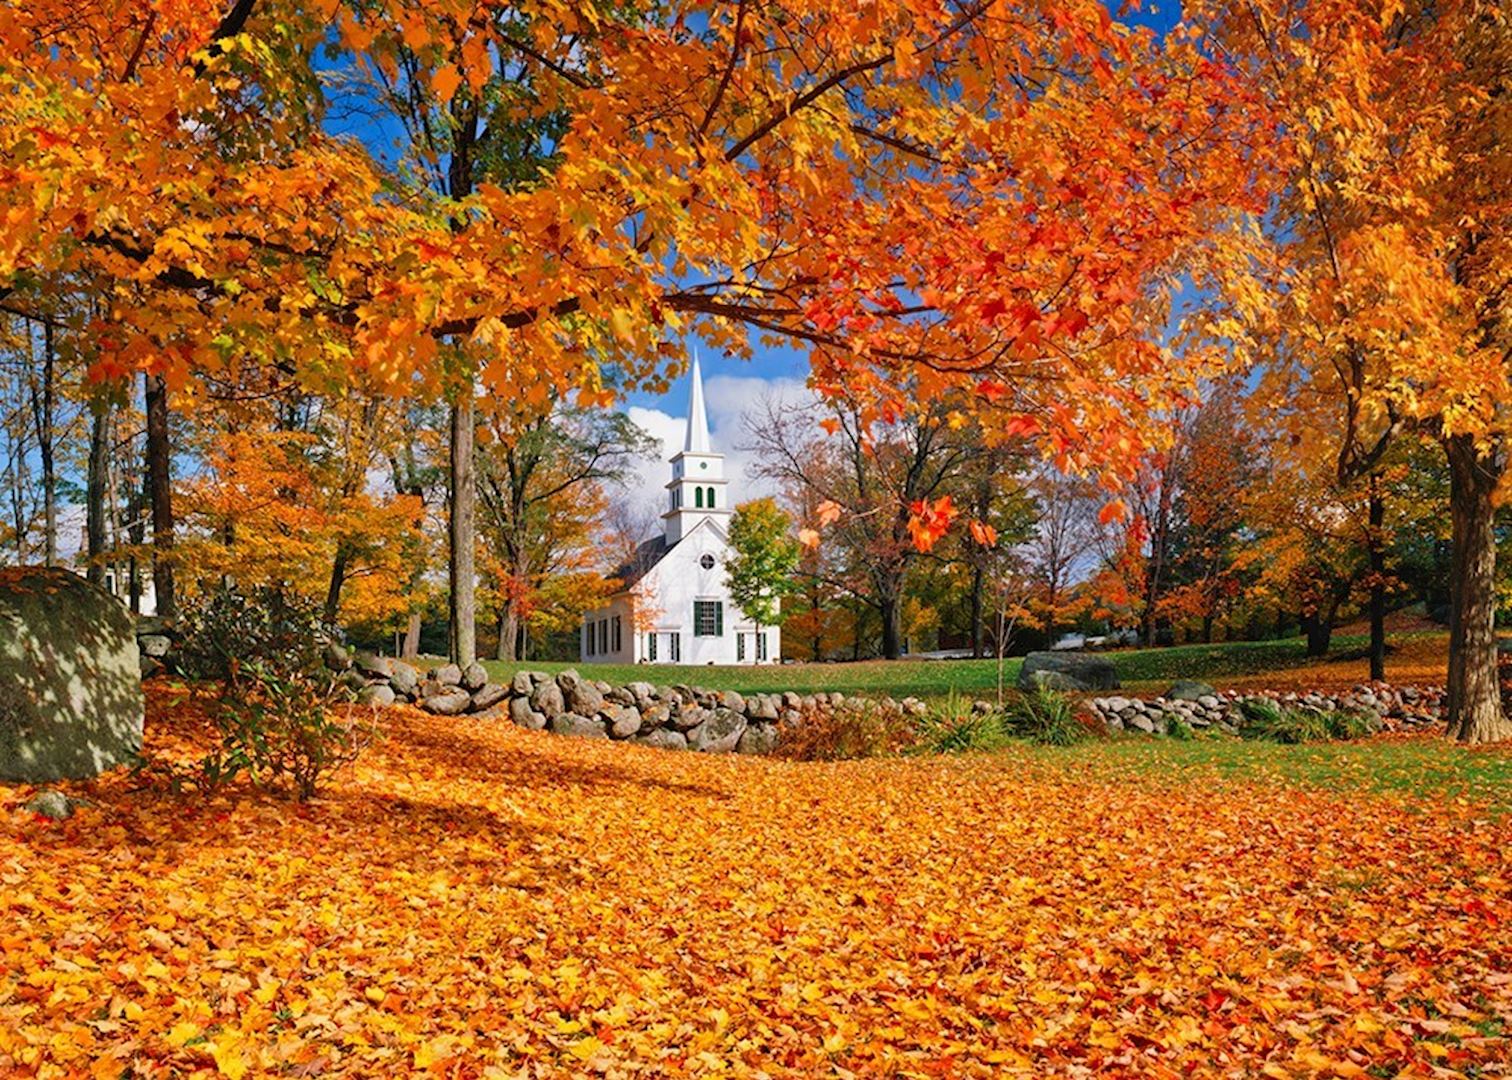 Touring New England in the fall | Travel guides | Audley Travel